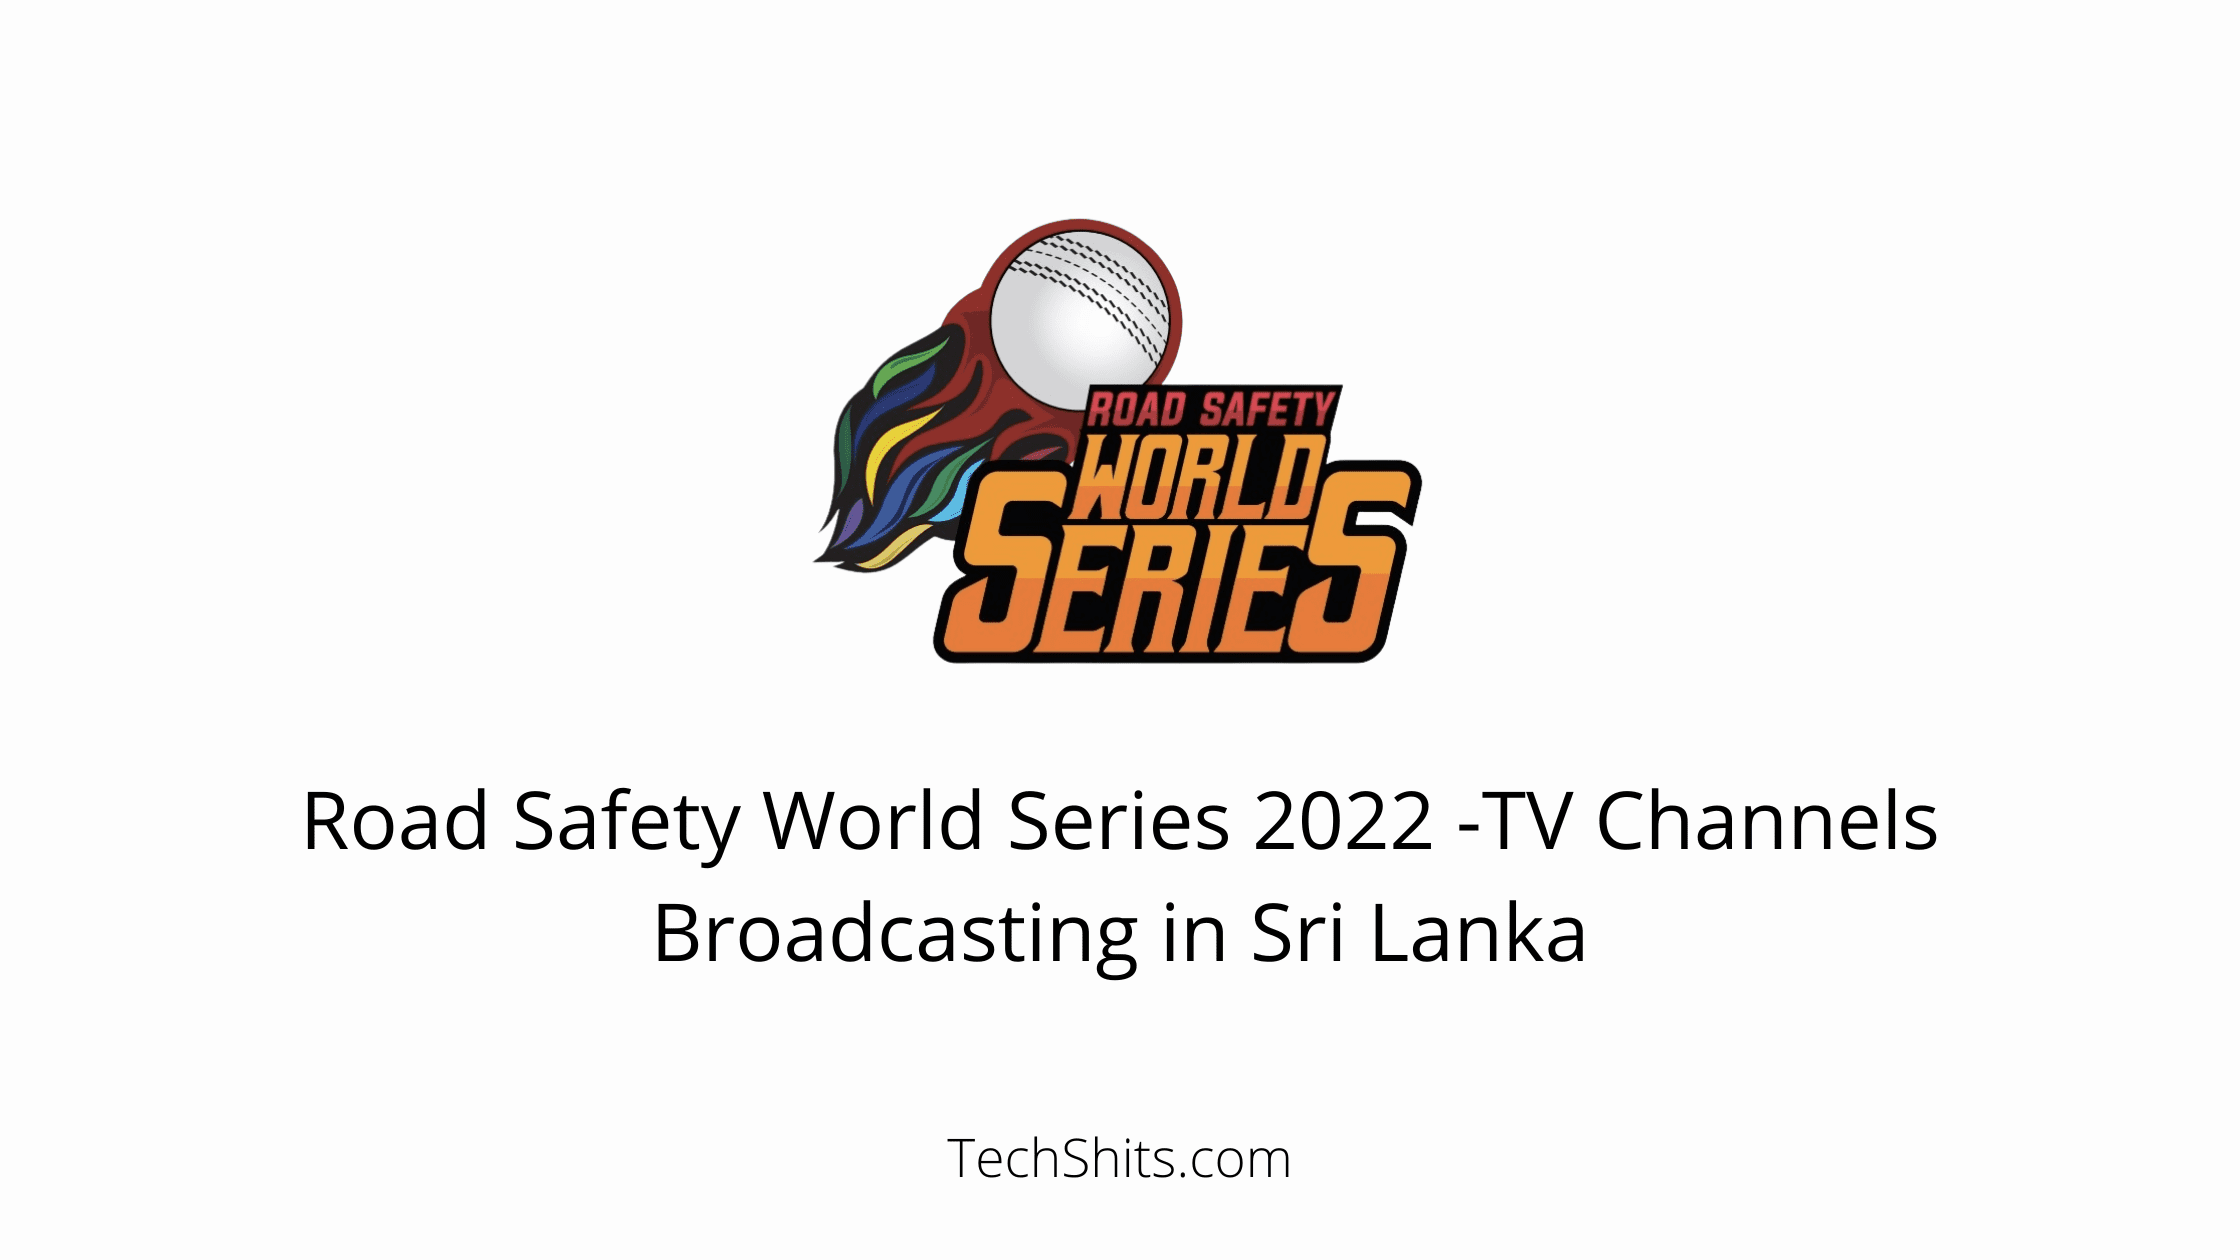 Road Safety World Series 2022 -TV Channels Broadcasting in Sri Lanka